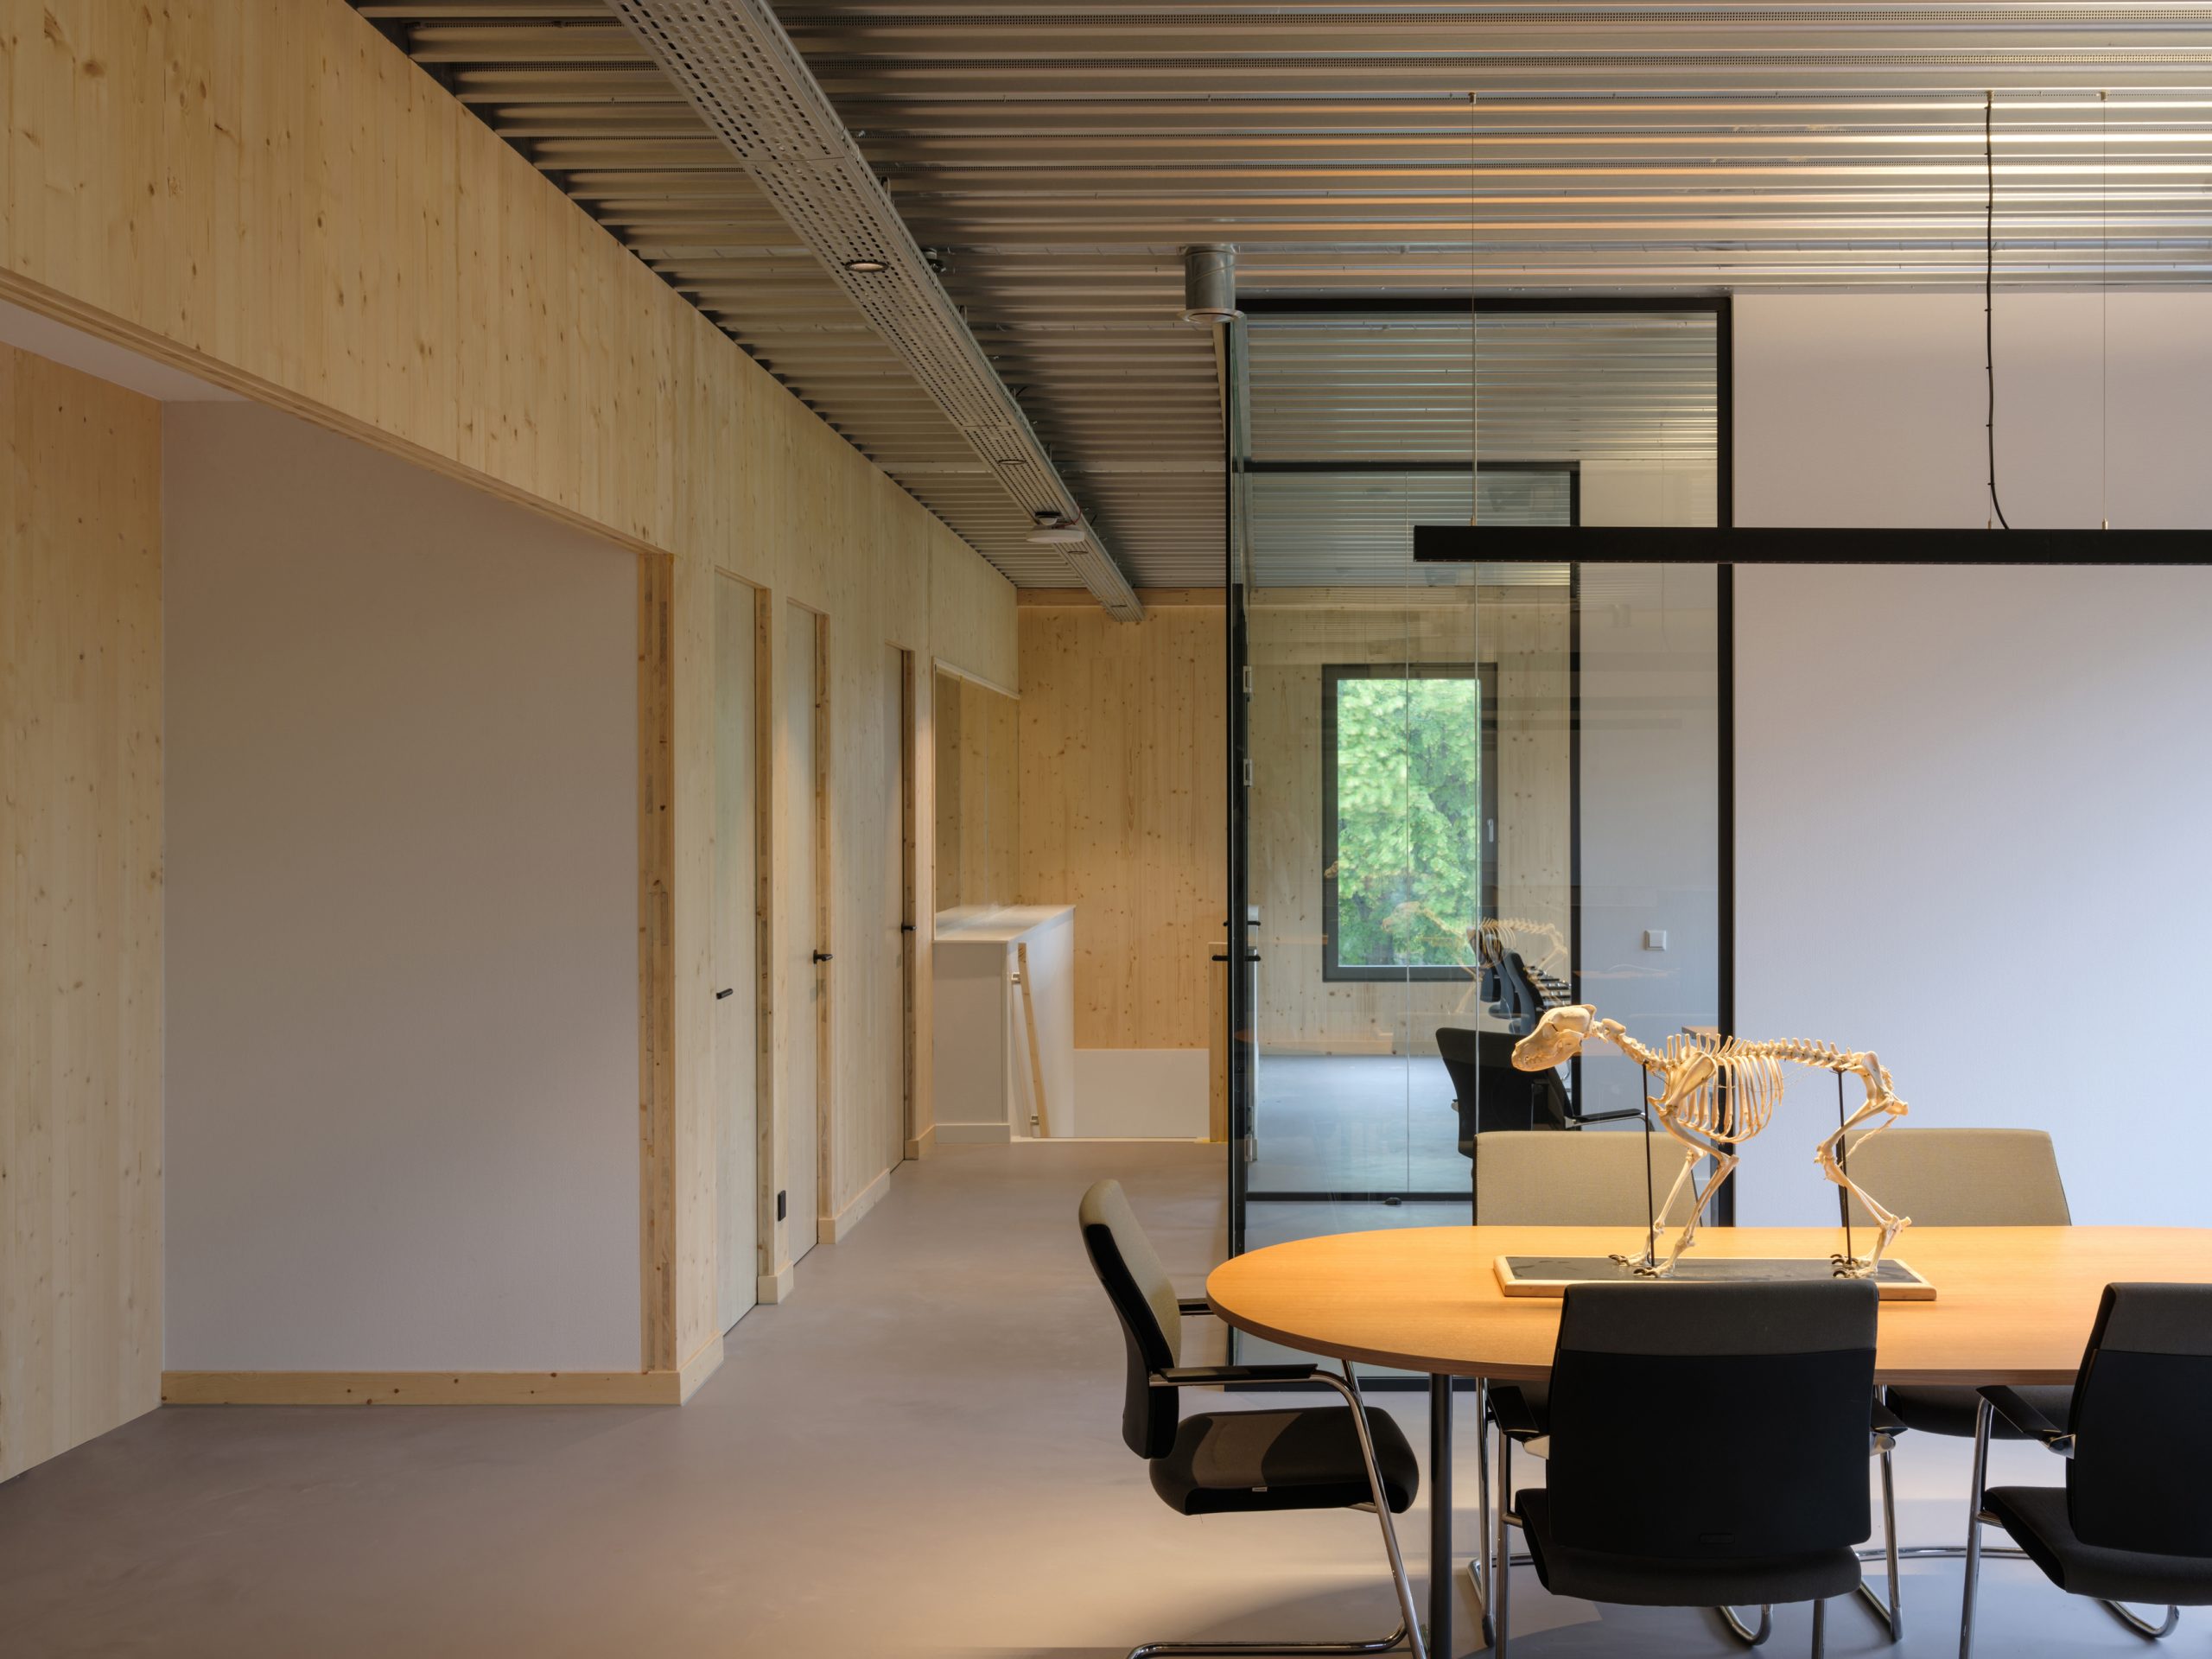 Office workspace overview with social space black kitchen and CLT wood walls view. Veterinary clinic design for Anicure ‘t Leidse Land in Leiderdorp, designed and built by MOST Architecture, Rotterdam